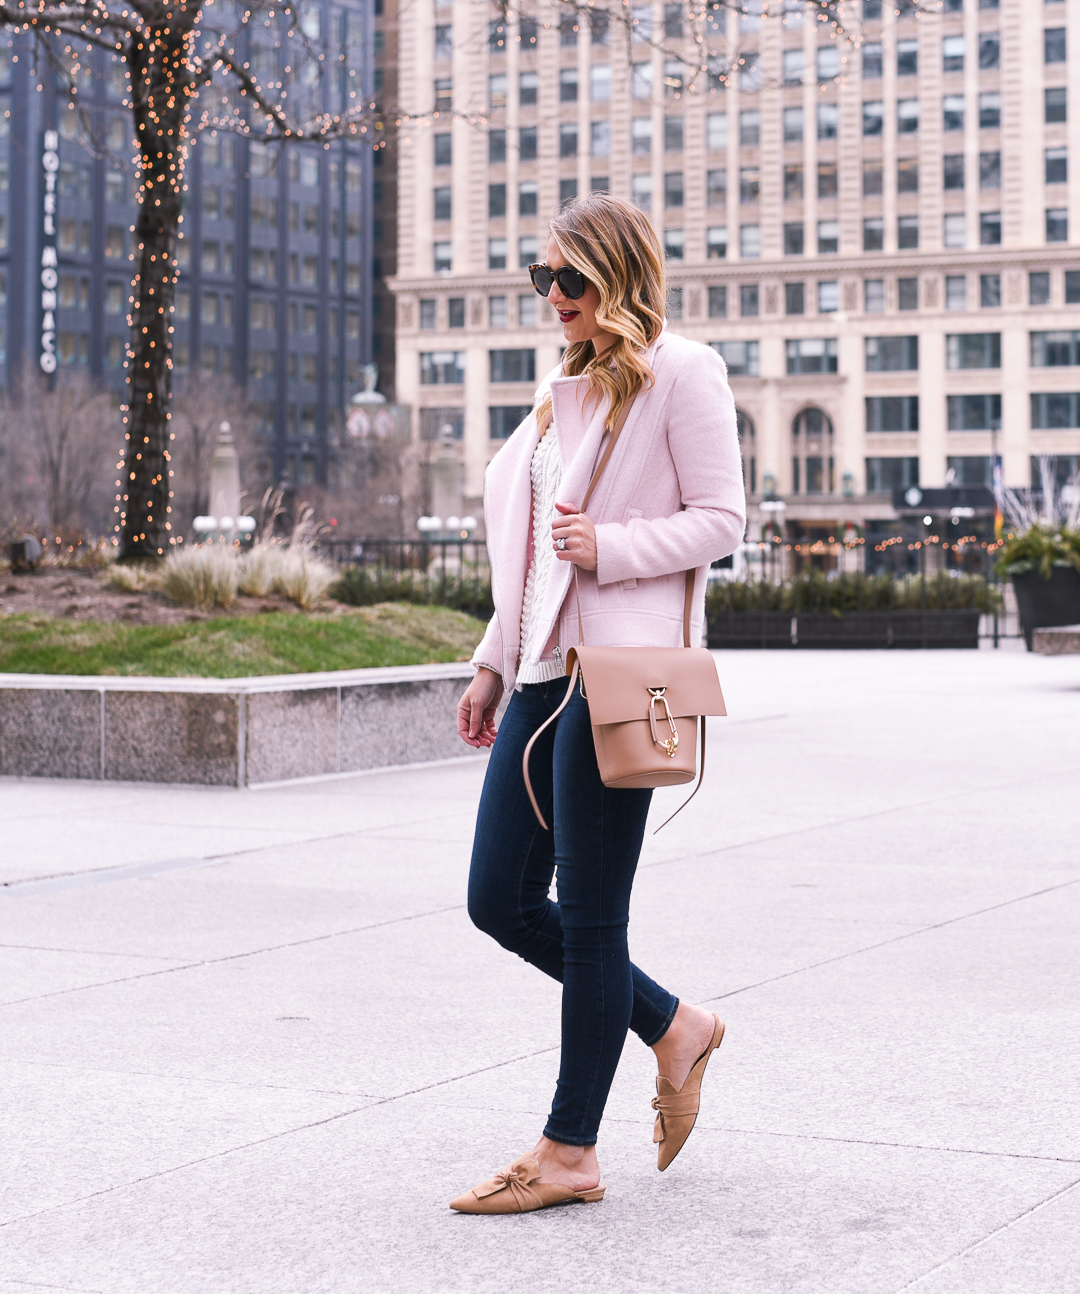 how to wear a pink coat - tahari bow mules by Chicago fashion blogger Visions of Vogue